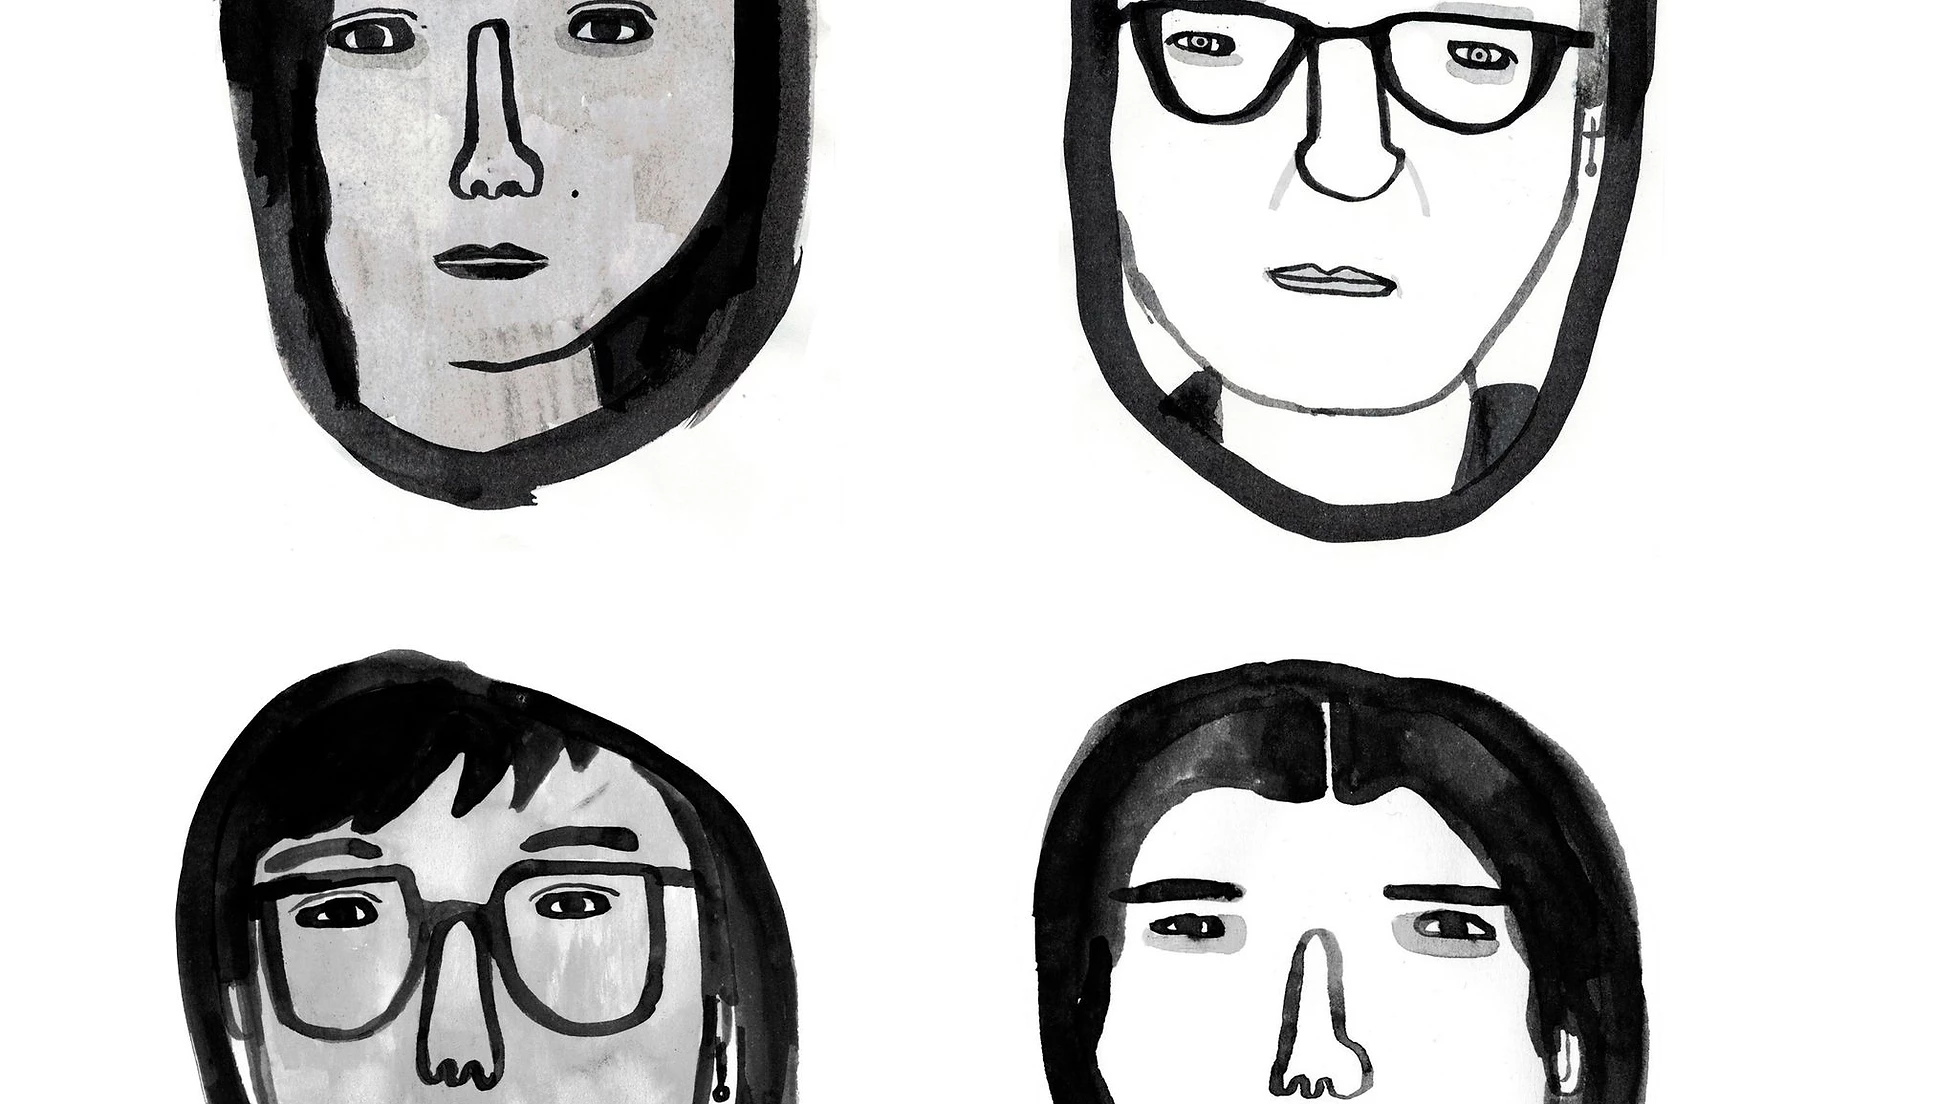 An ink illustration - a grid of four cartoon women's faces, all staring ahead. Two wear glasses. The image is cropped so the top of the top two women's heads are missing, and the bottom of the bottom two women's heads are missing.